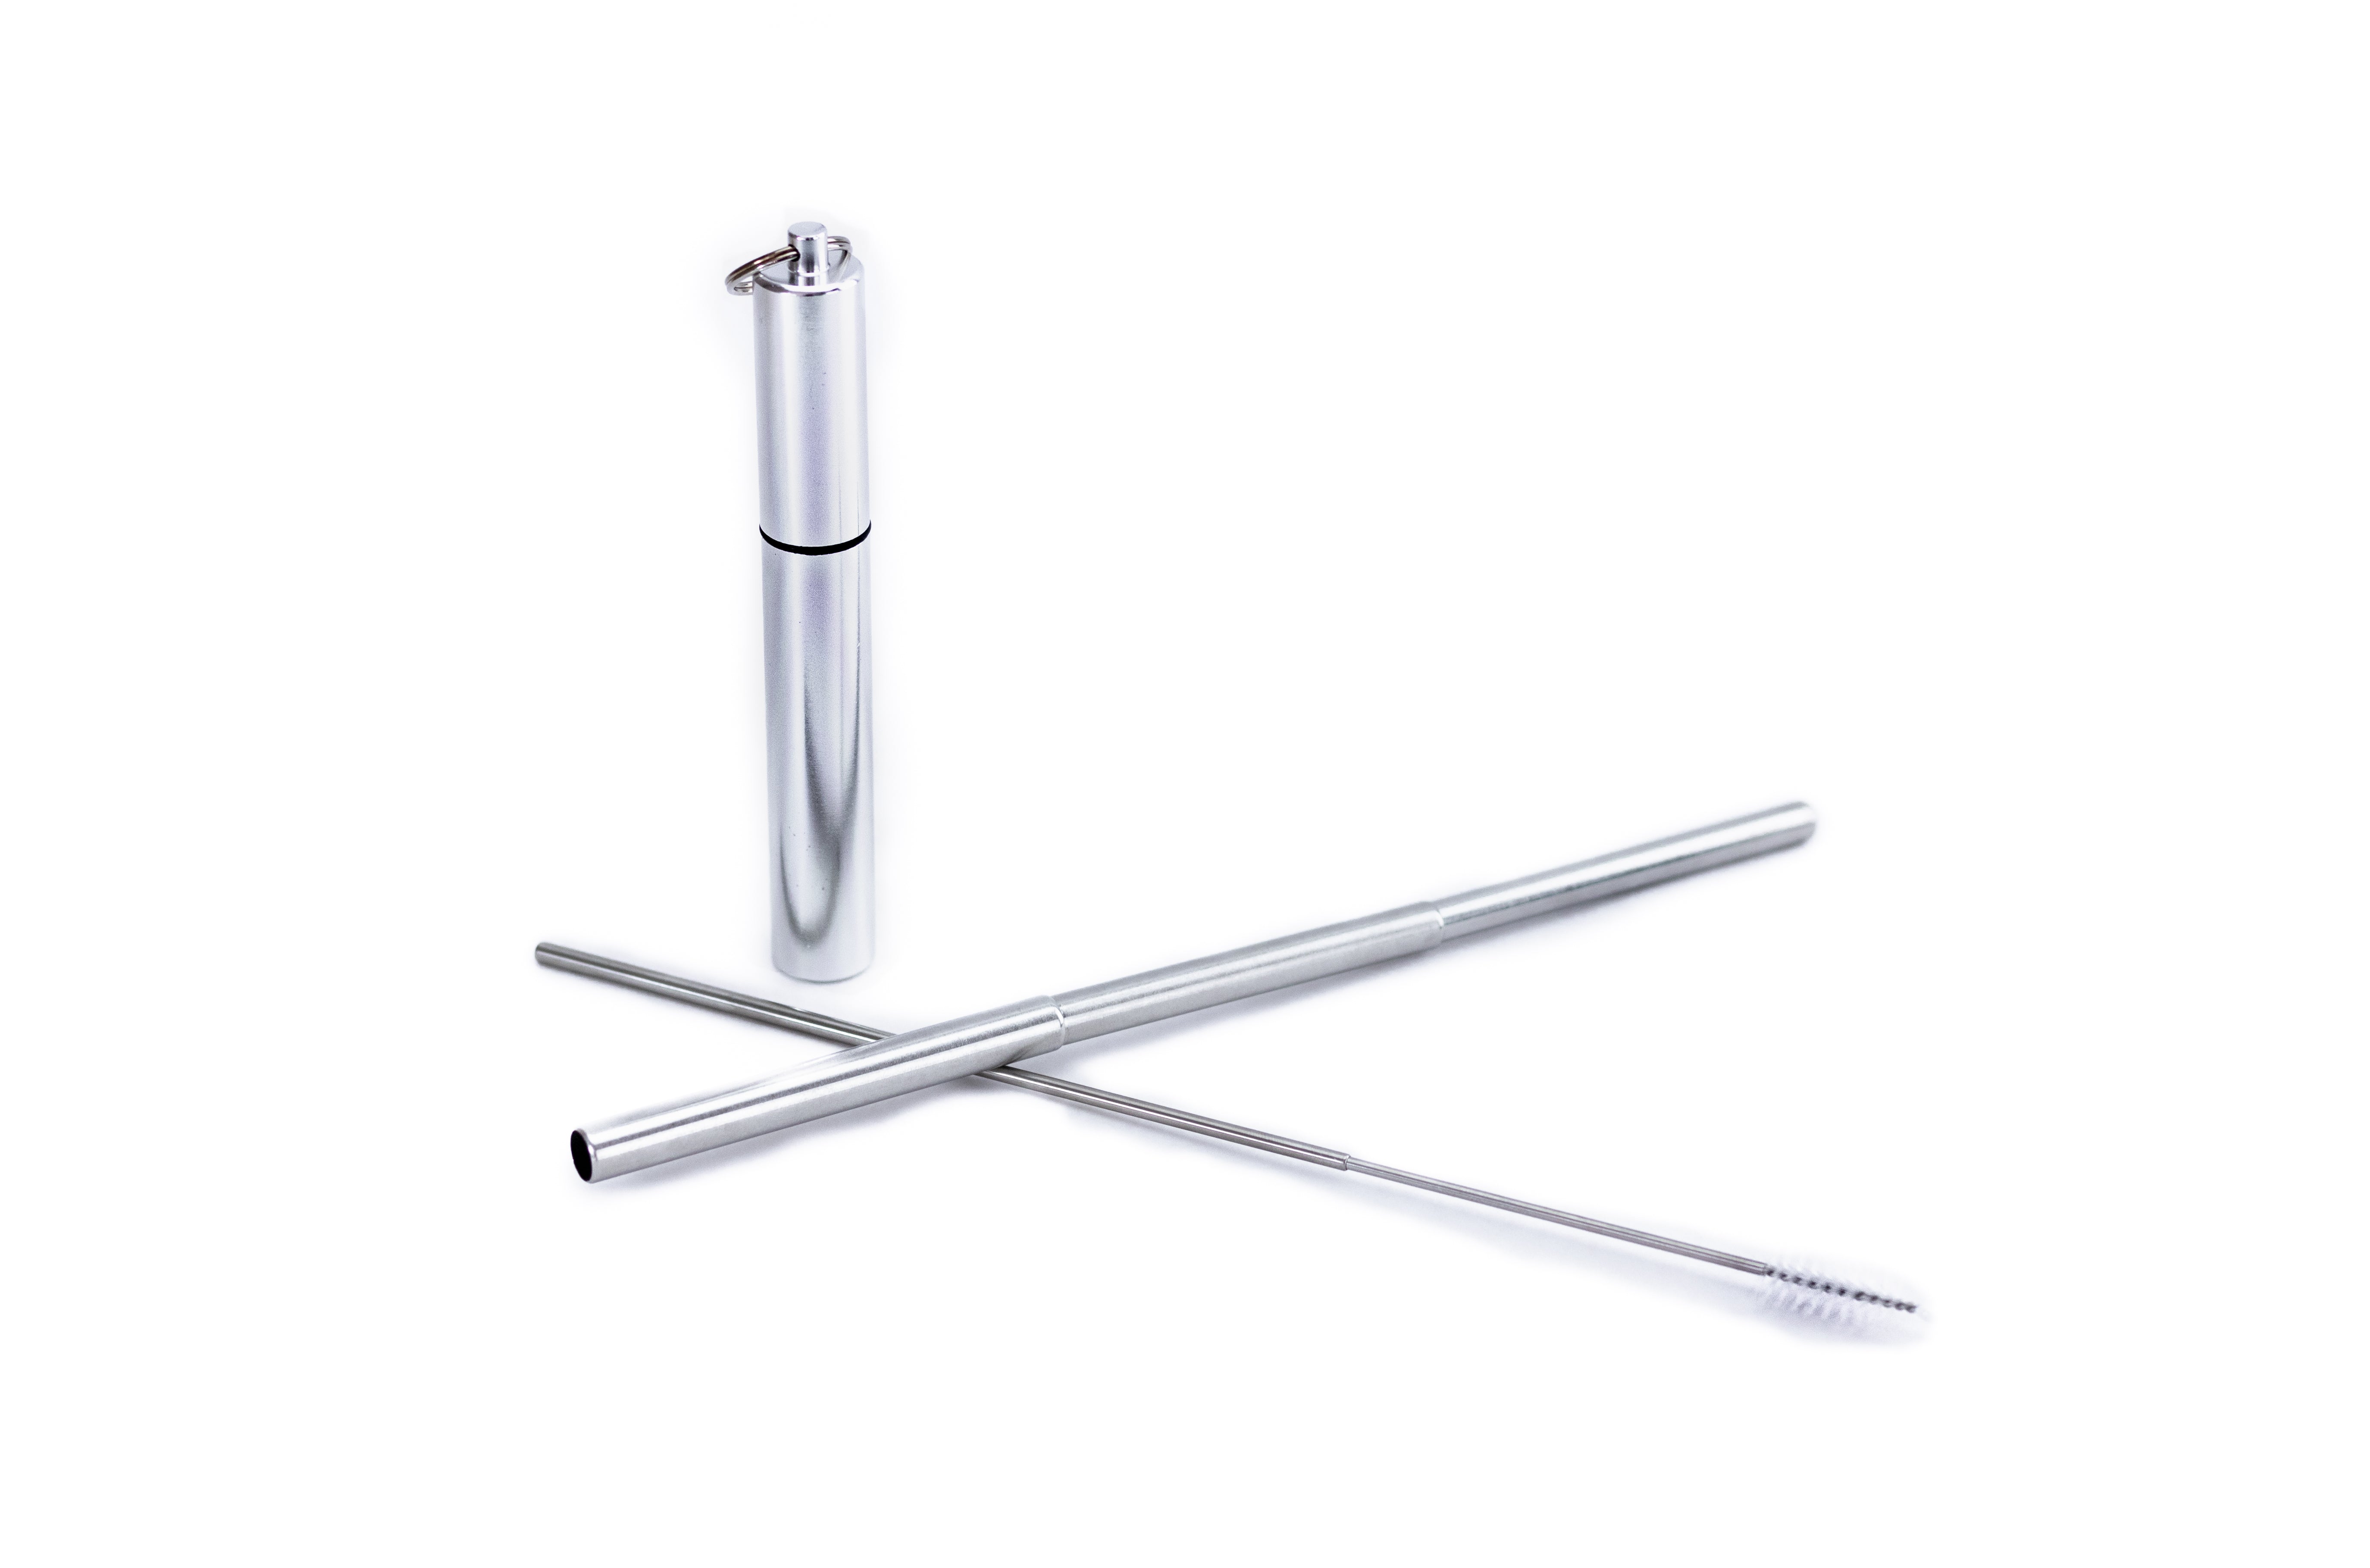 Extendable Stainless Steel Straw in Silver Carrying Case : Travel Straw Collection